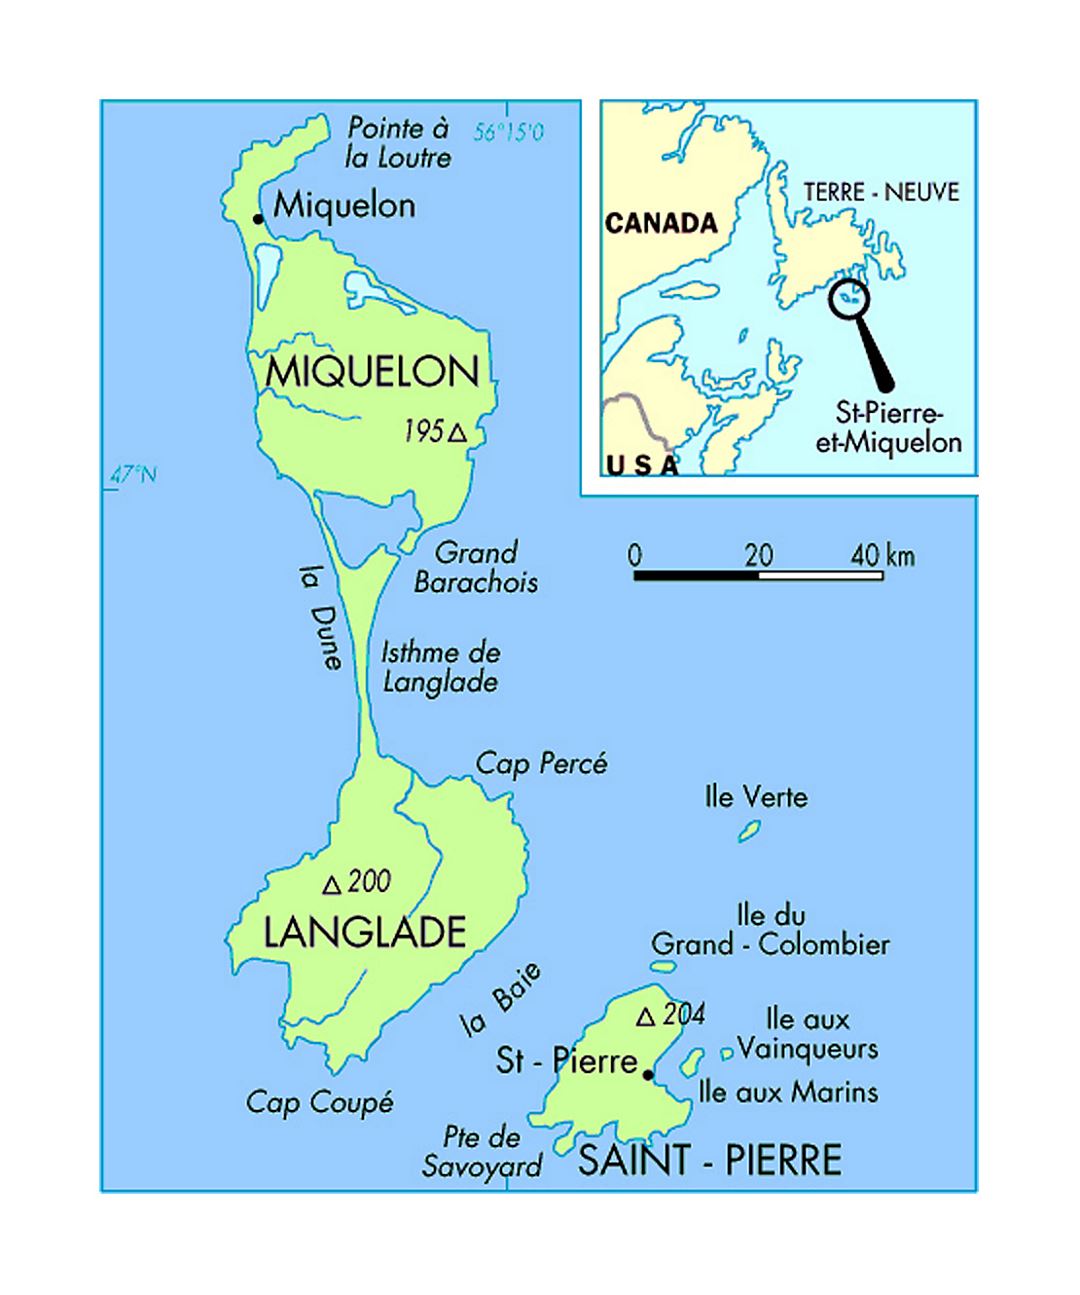 Political map of Saint Pierre and Miquelon with majot cities